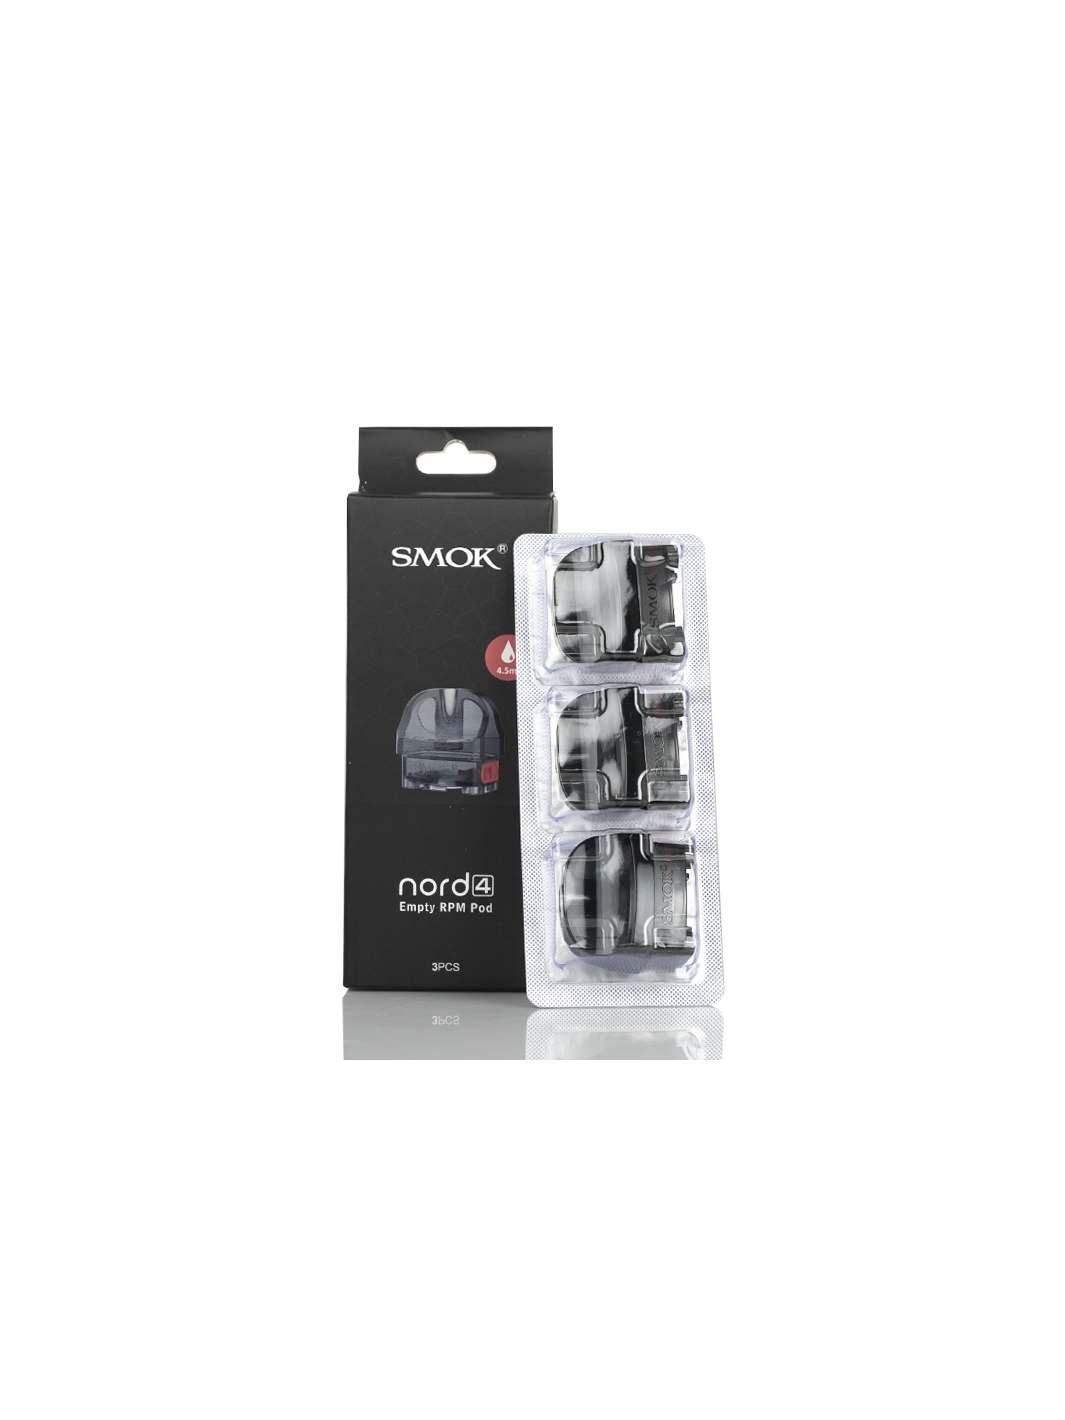 SMOK Nord 4 Rpm Pods (3 Pack)